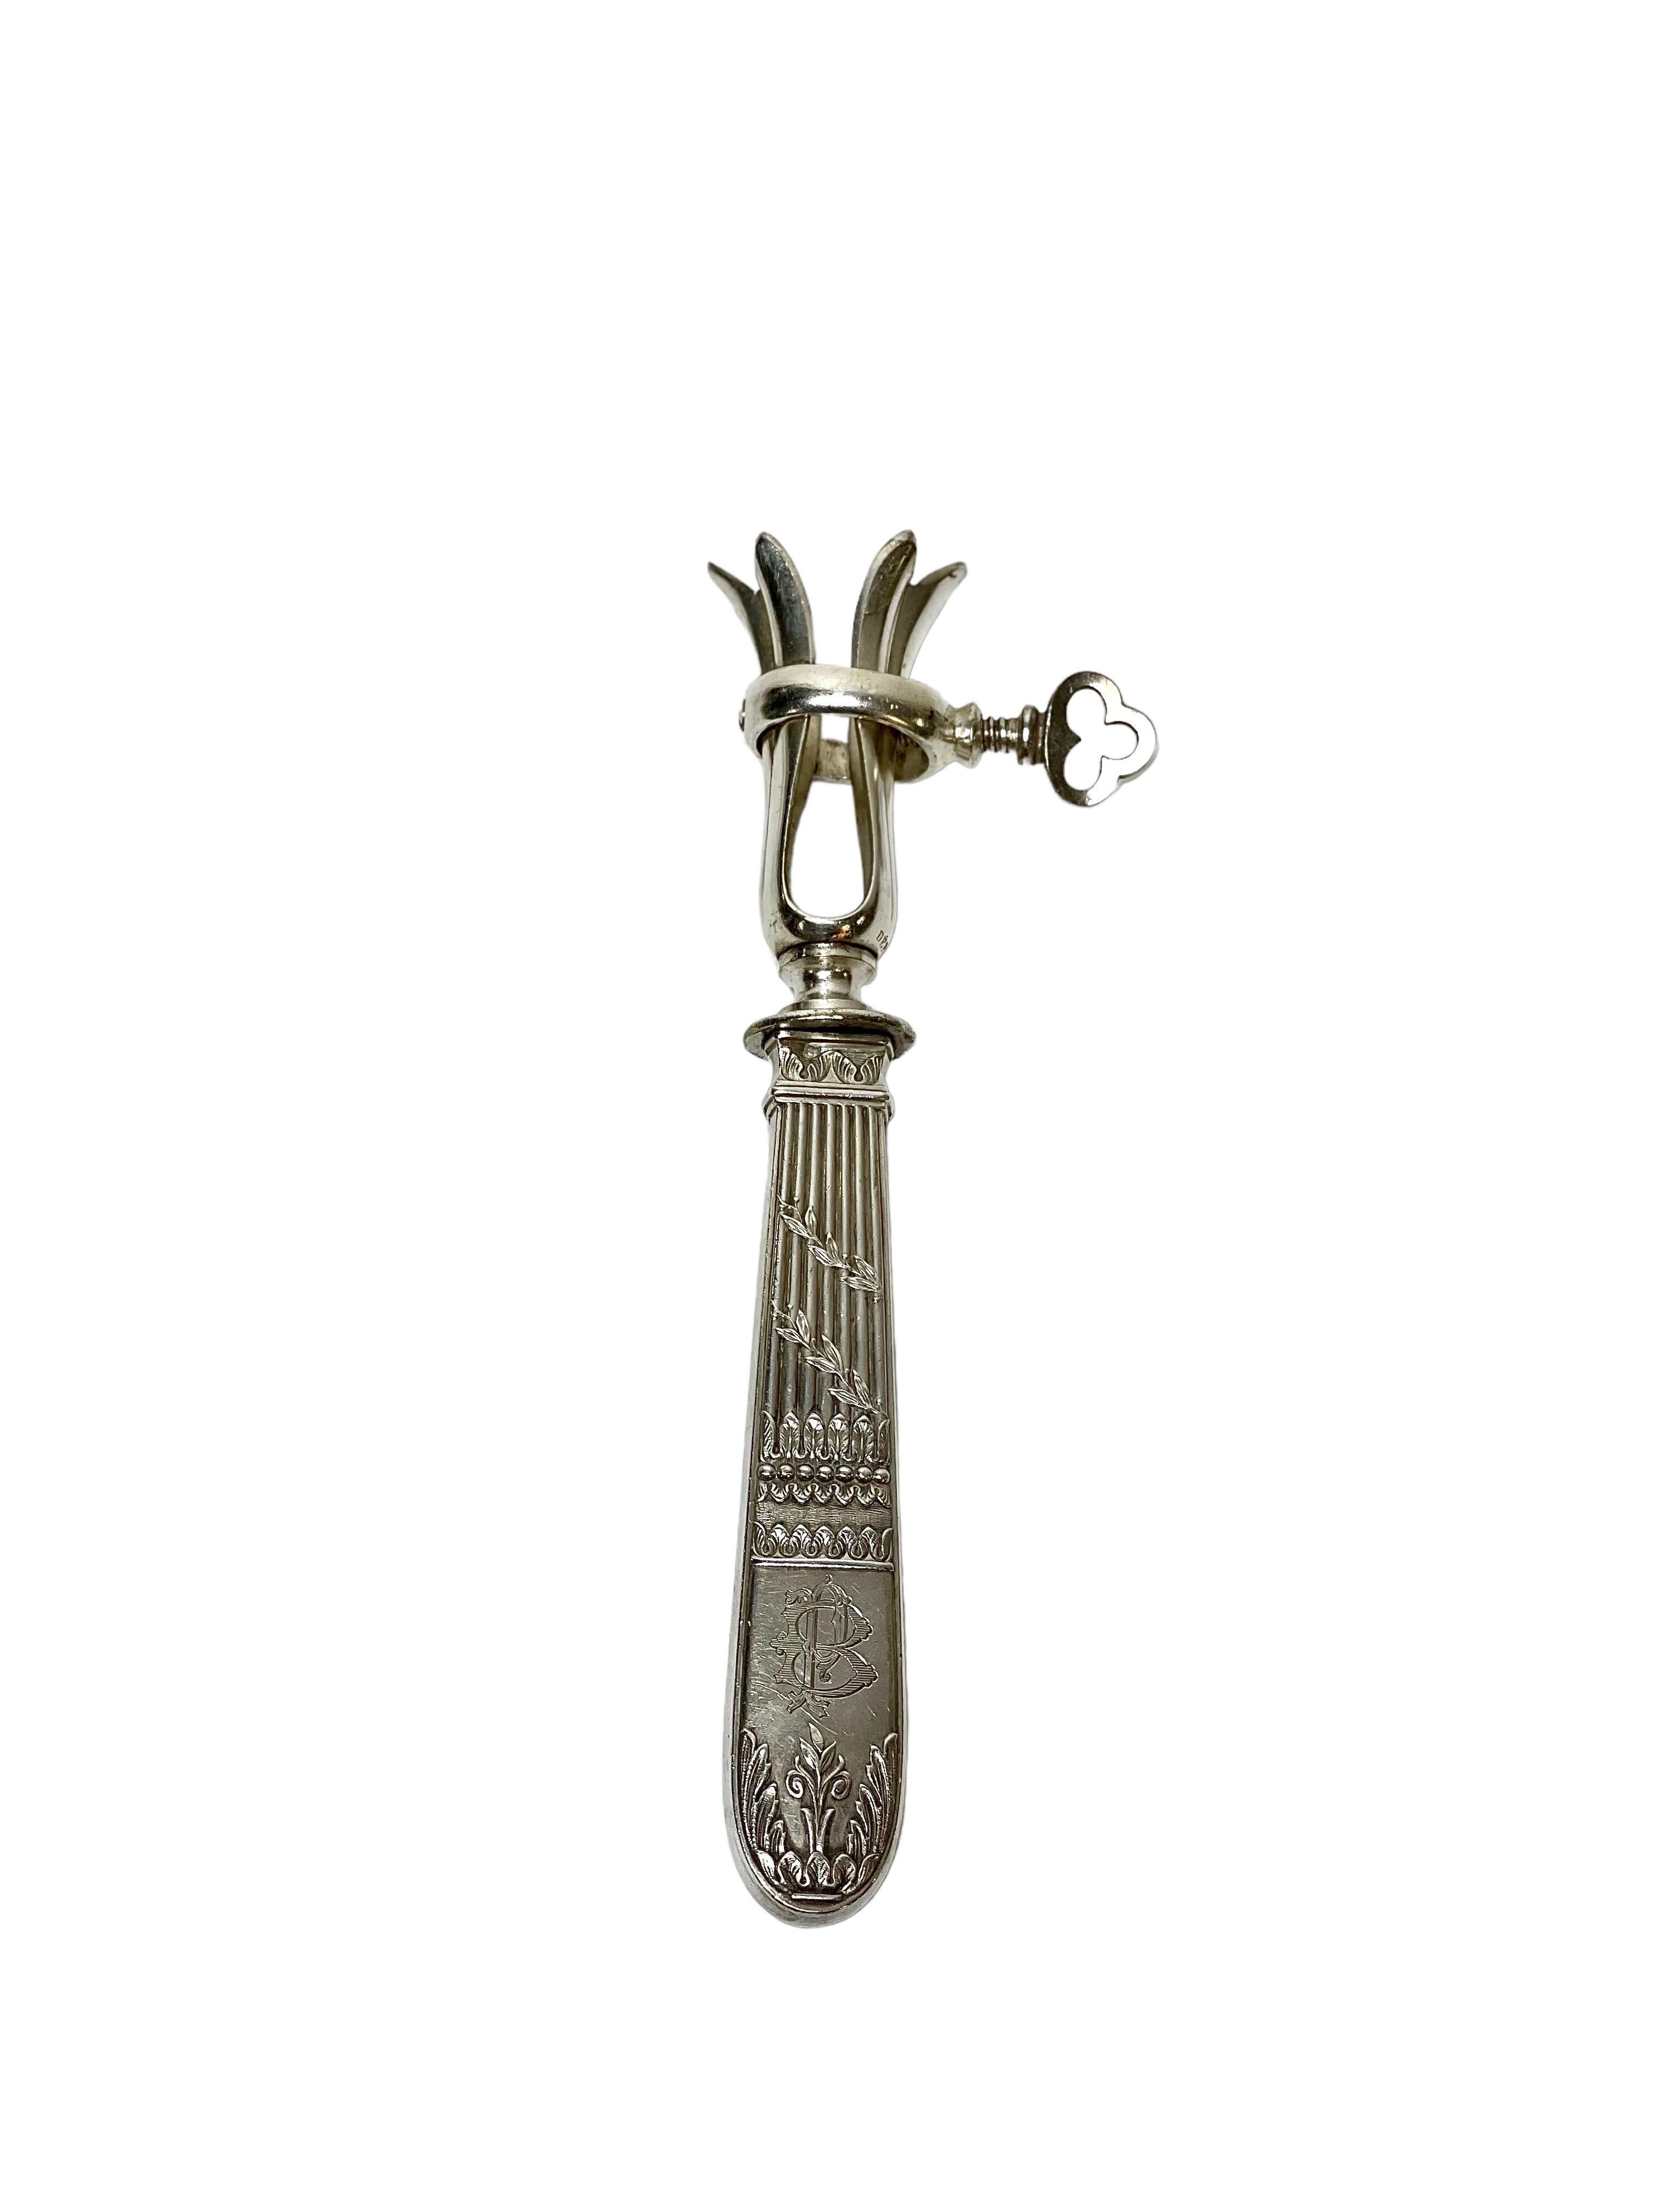 19th Century Silver-Plated Lamb Carving Set For Sale